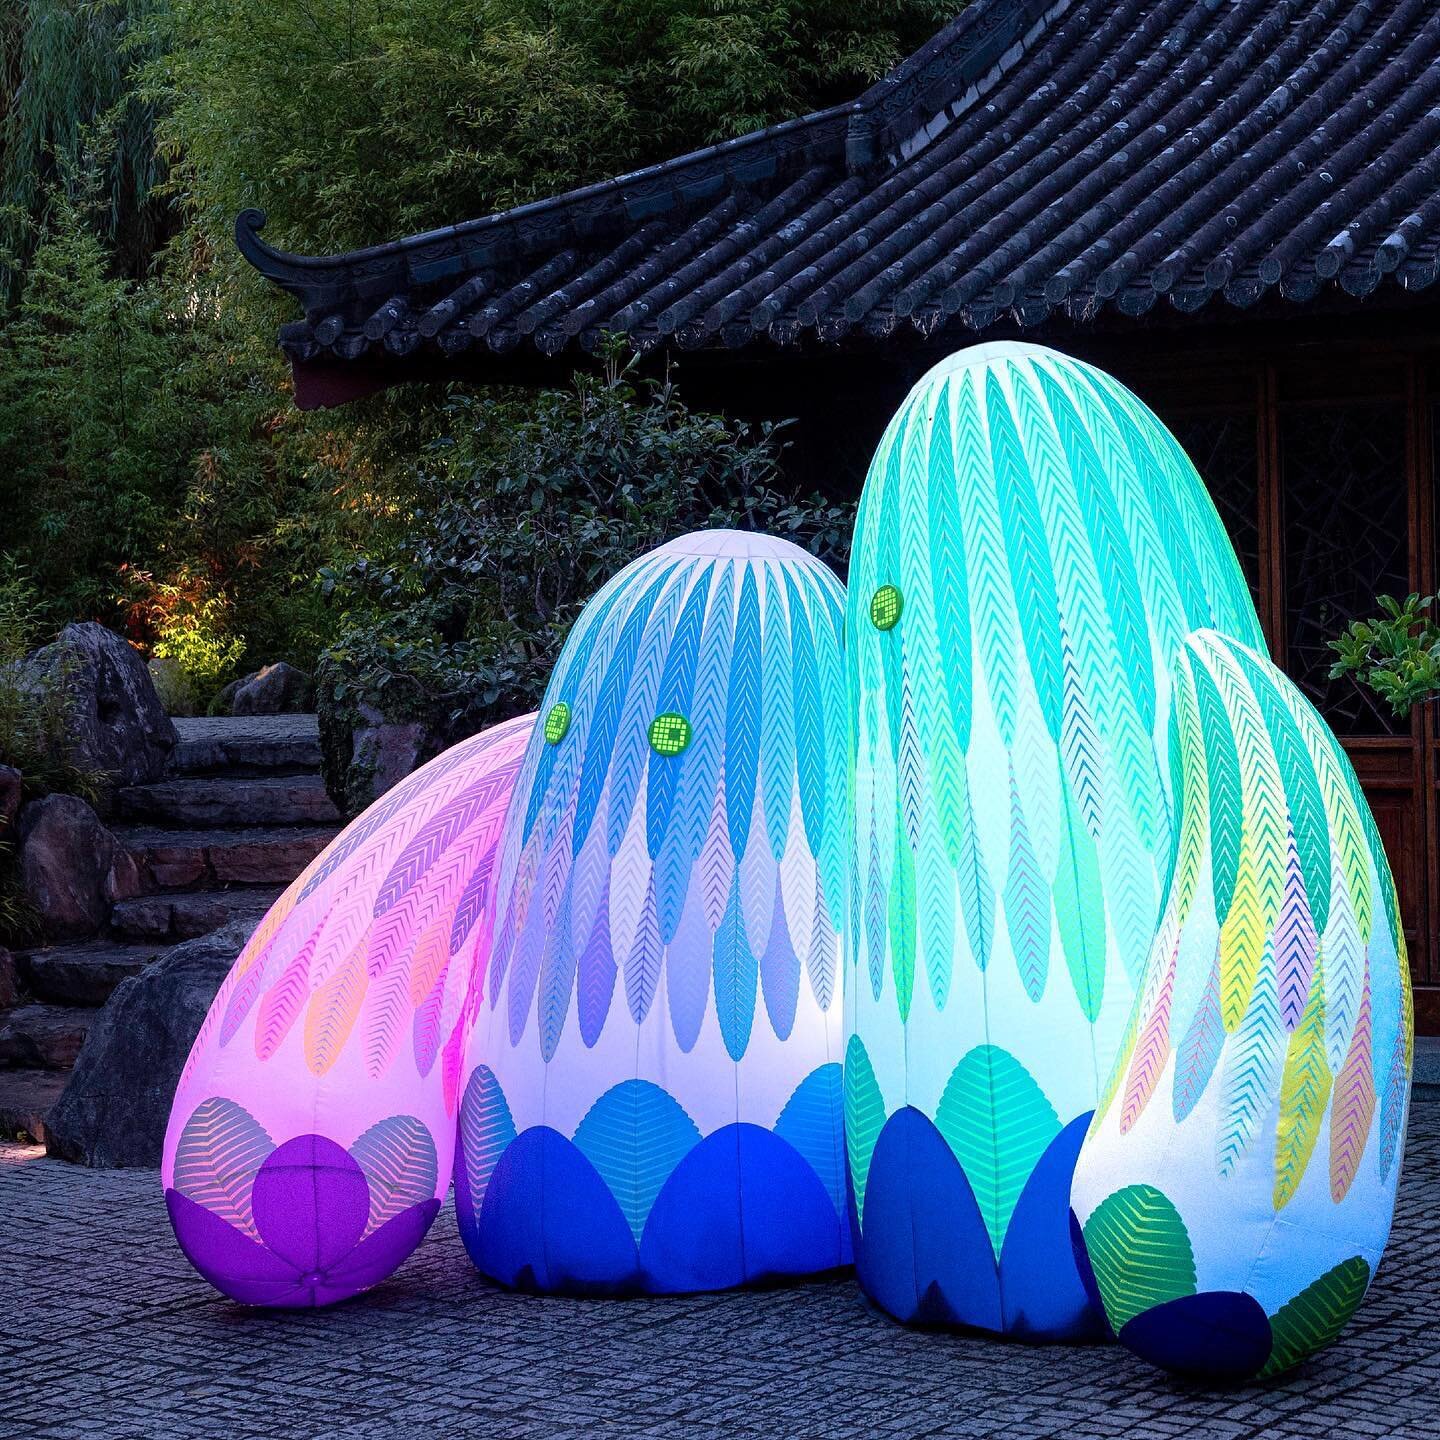 This sweet hug between inflatable friends can be viewed until 28th March at the Chinese Garden of Friendship as part of Fever's Nature Illuminated (along with three other installations by ENESS).

We affectionately call these two the Pickles. It's no